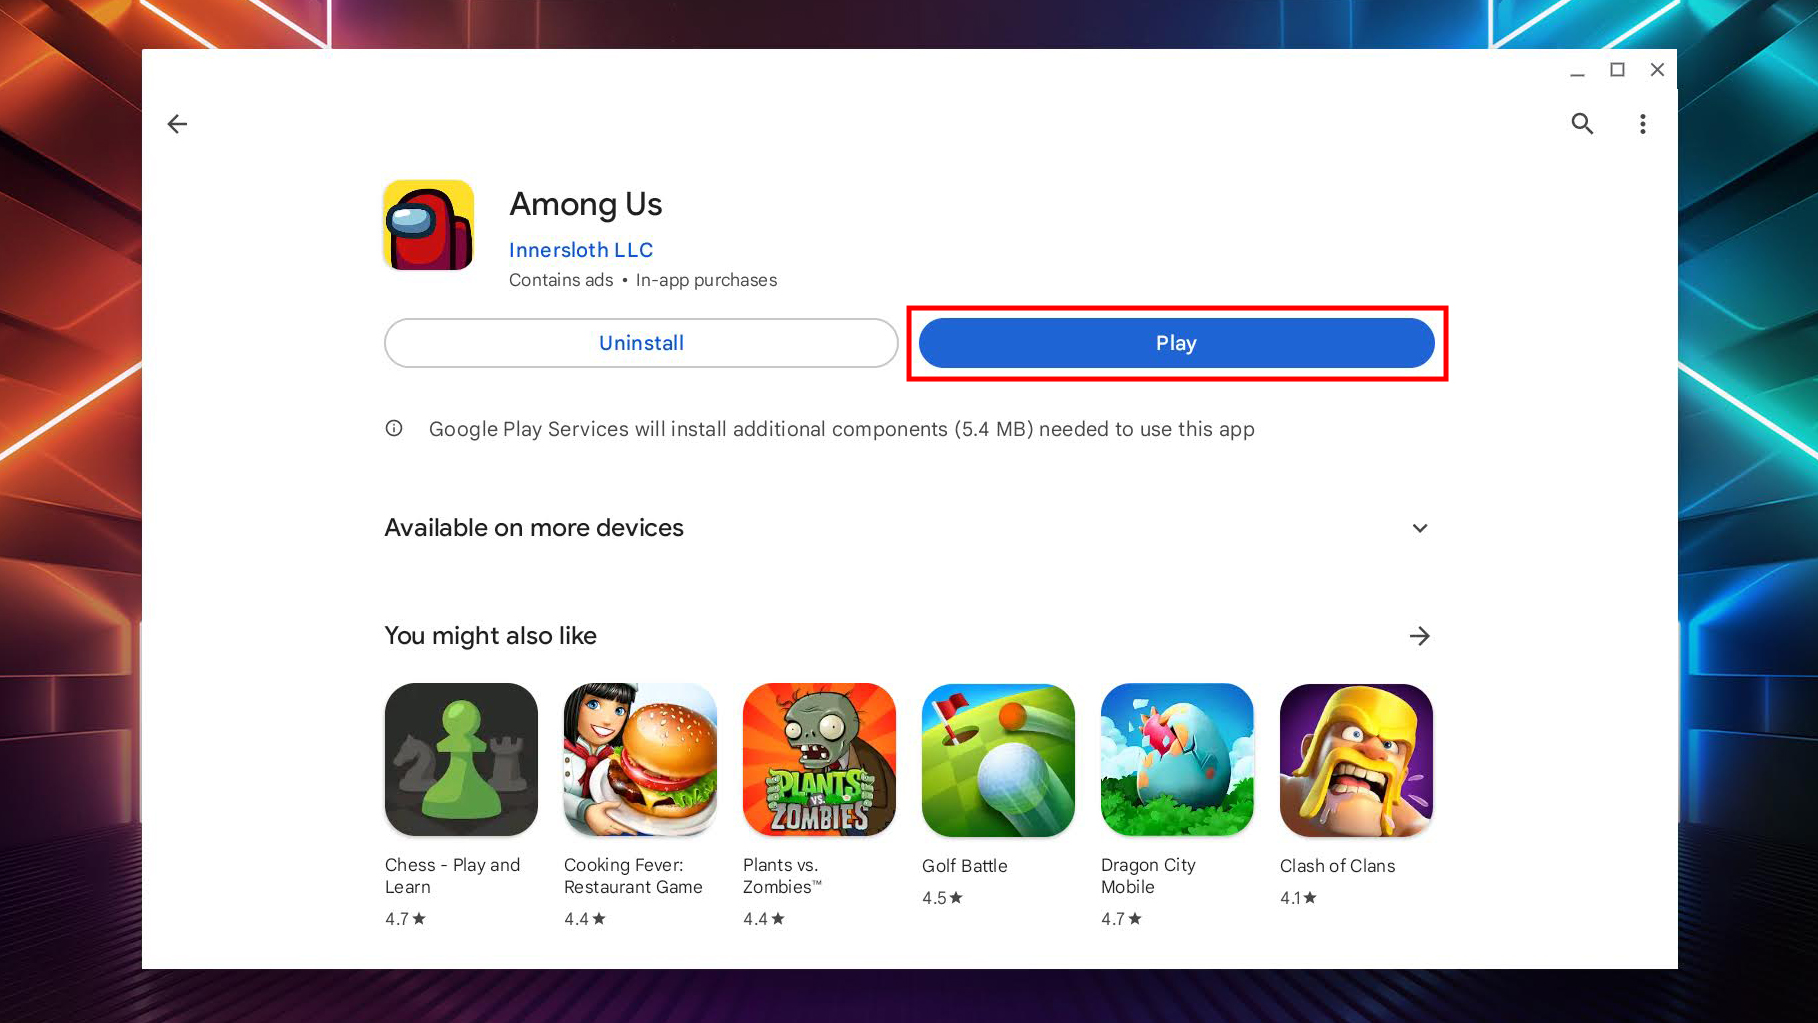 Download Among Us on Chromebook from Play Store 2